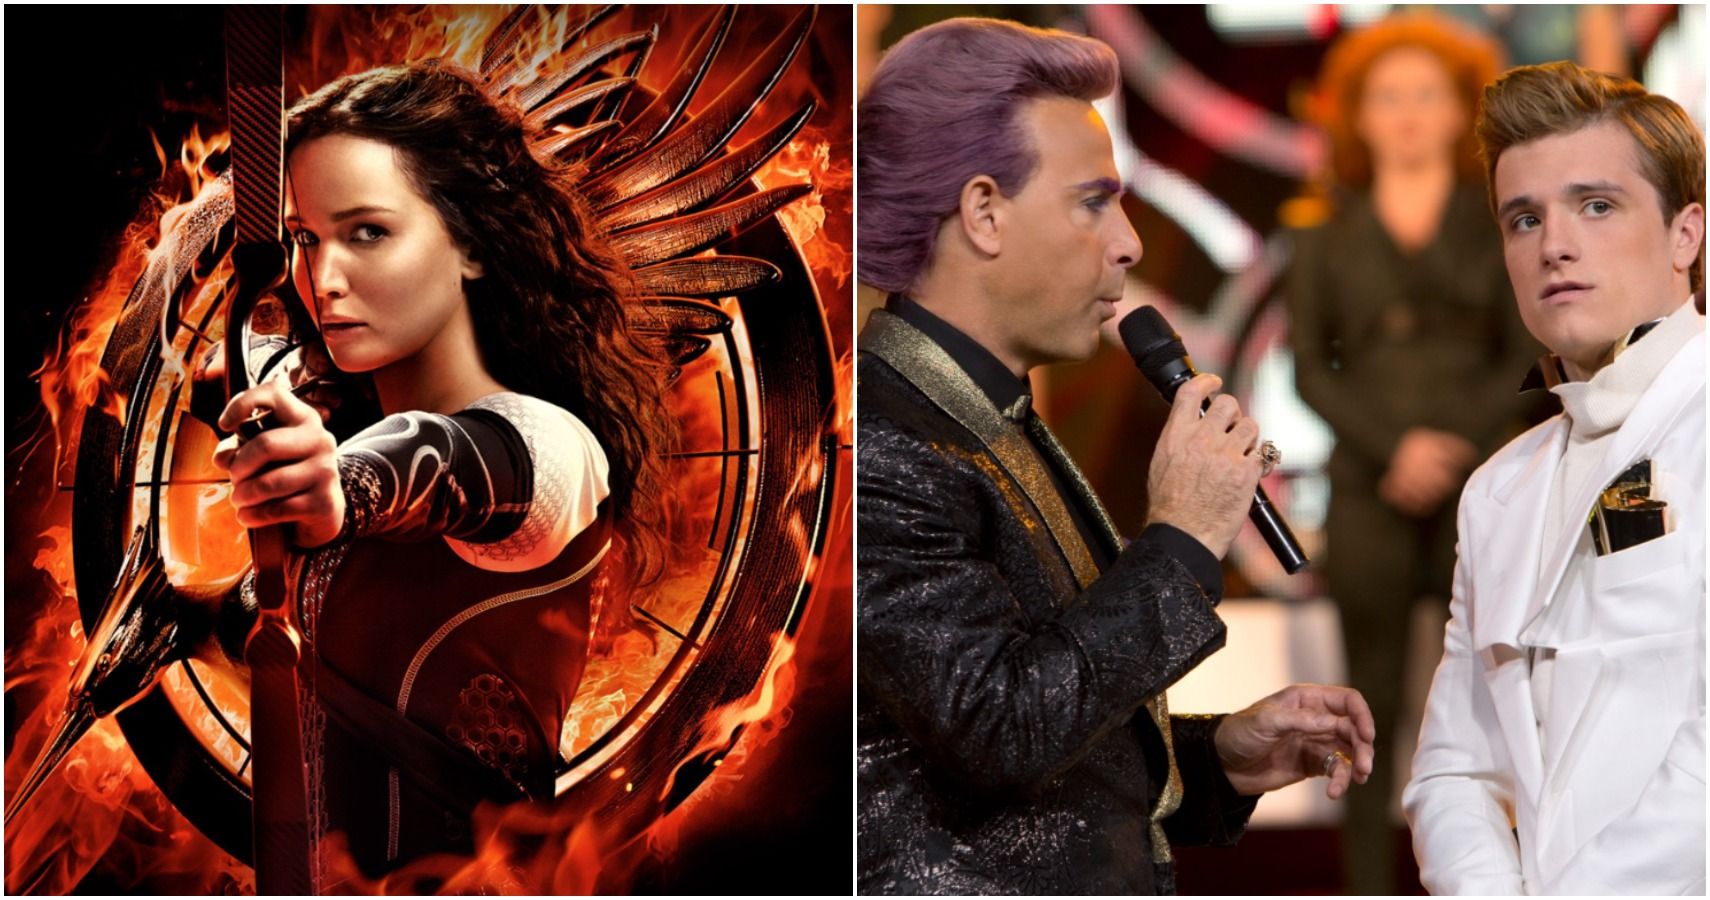 Hunger Games: Catching Fire' - Everything You Need To Know